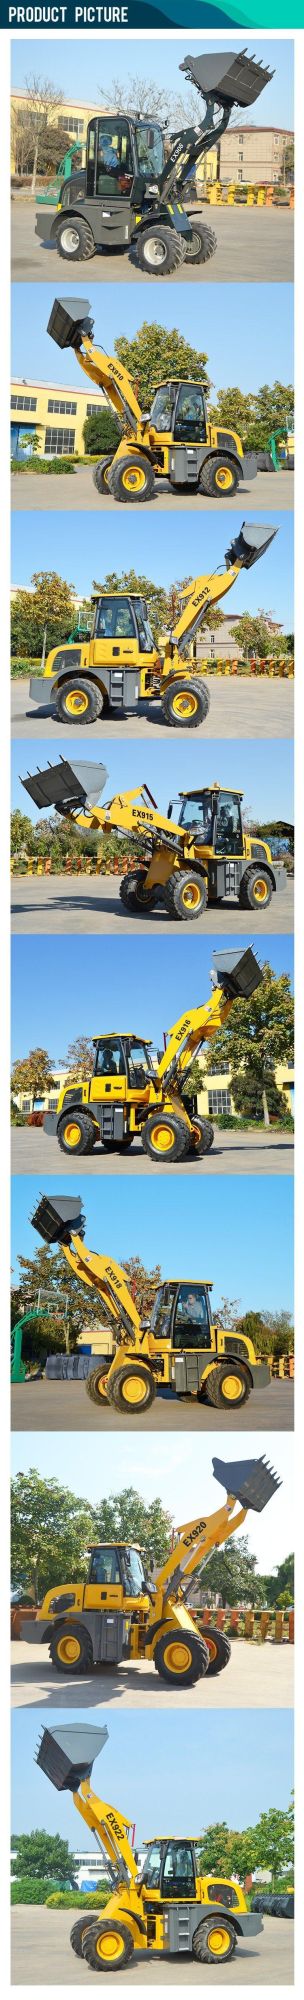 Huaya China Loader Mini Small Front End Loaders for Sale